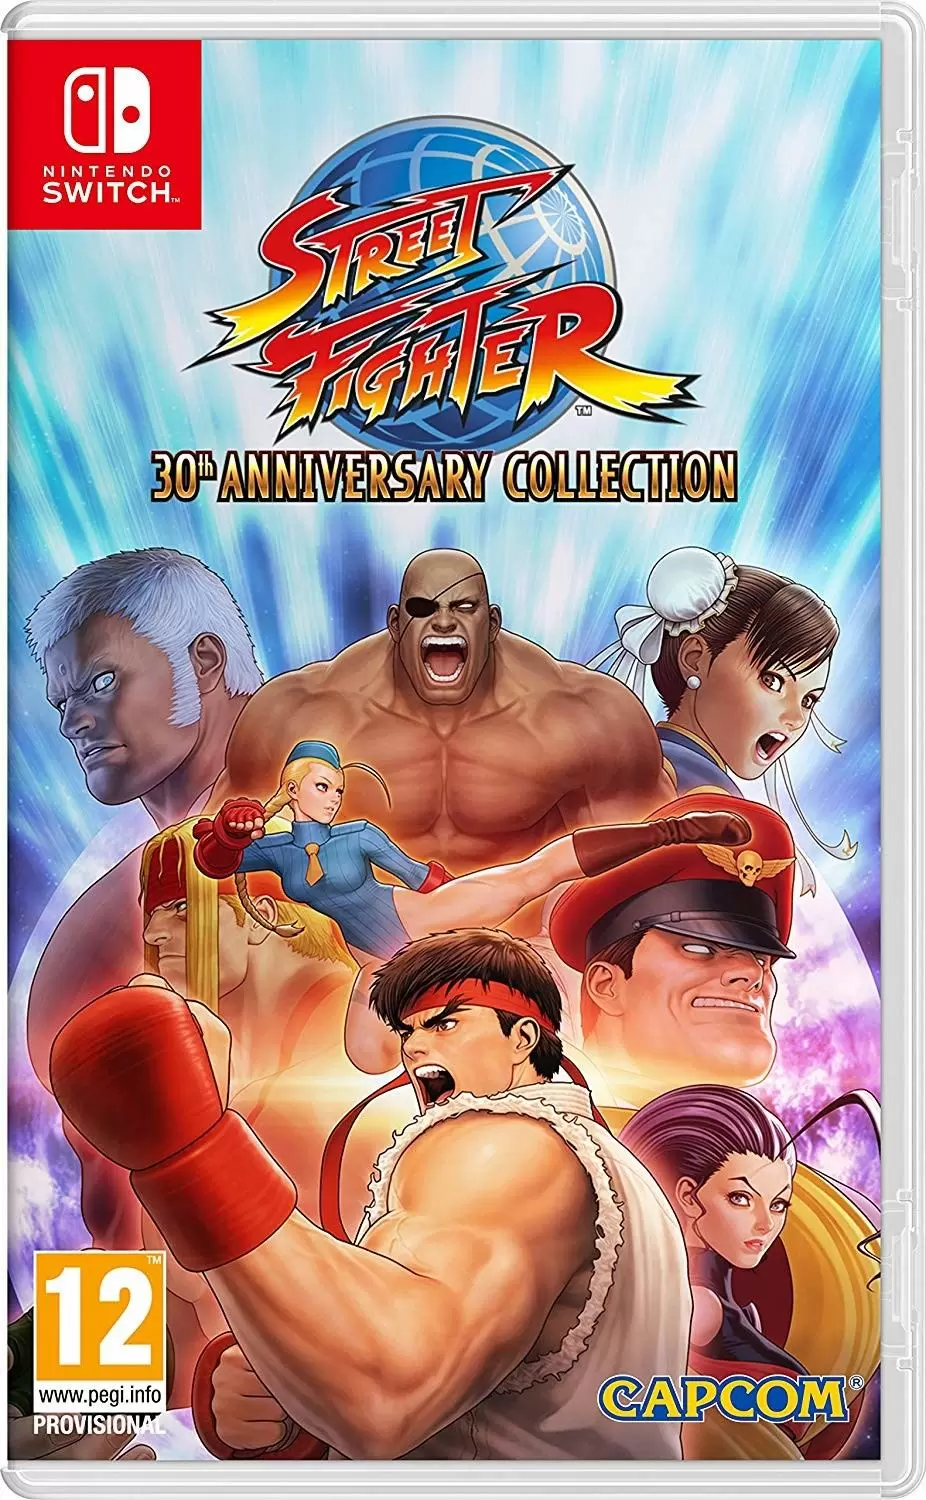 Nintendo Switch Games - Street Fighter 30th Anniversary Collection